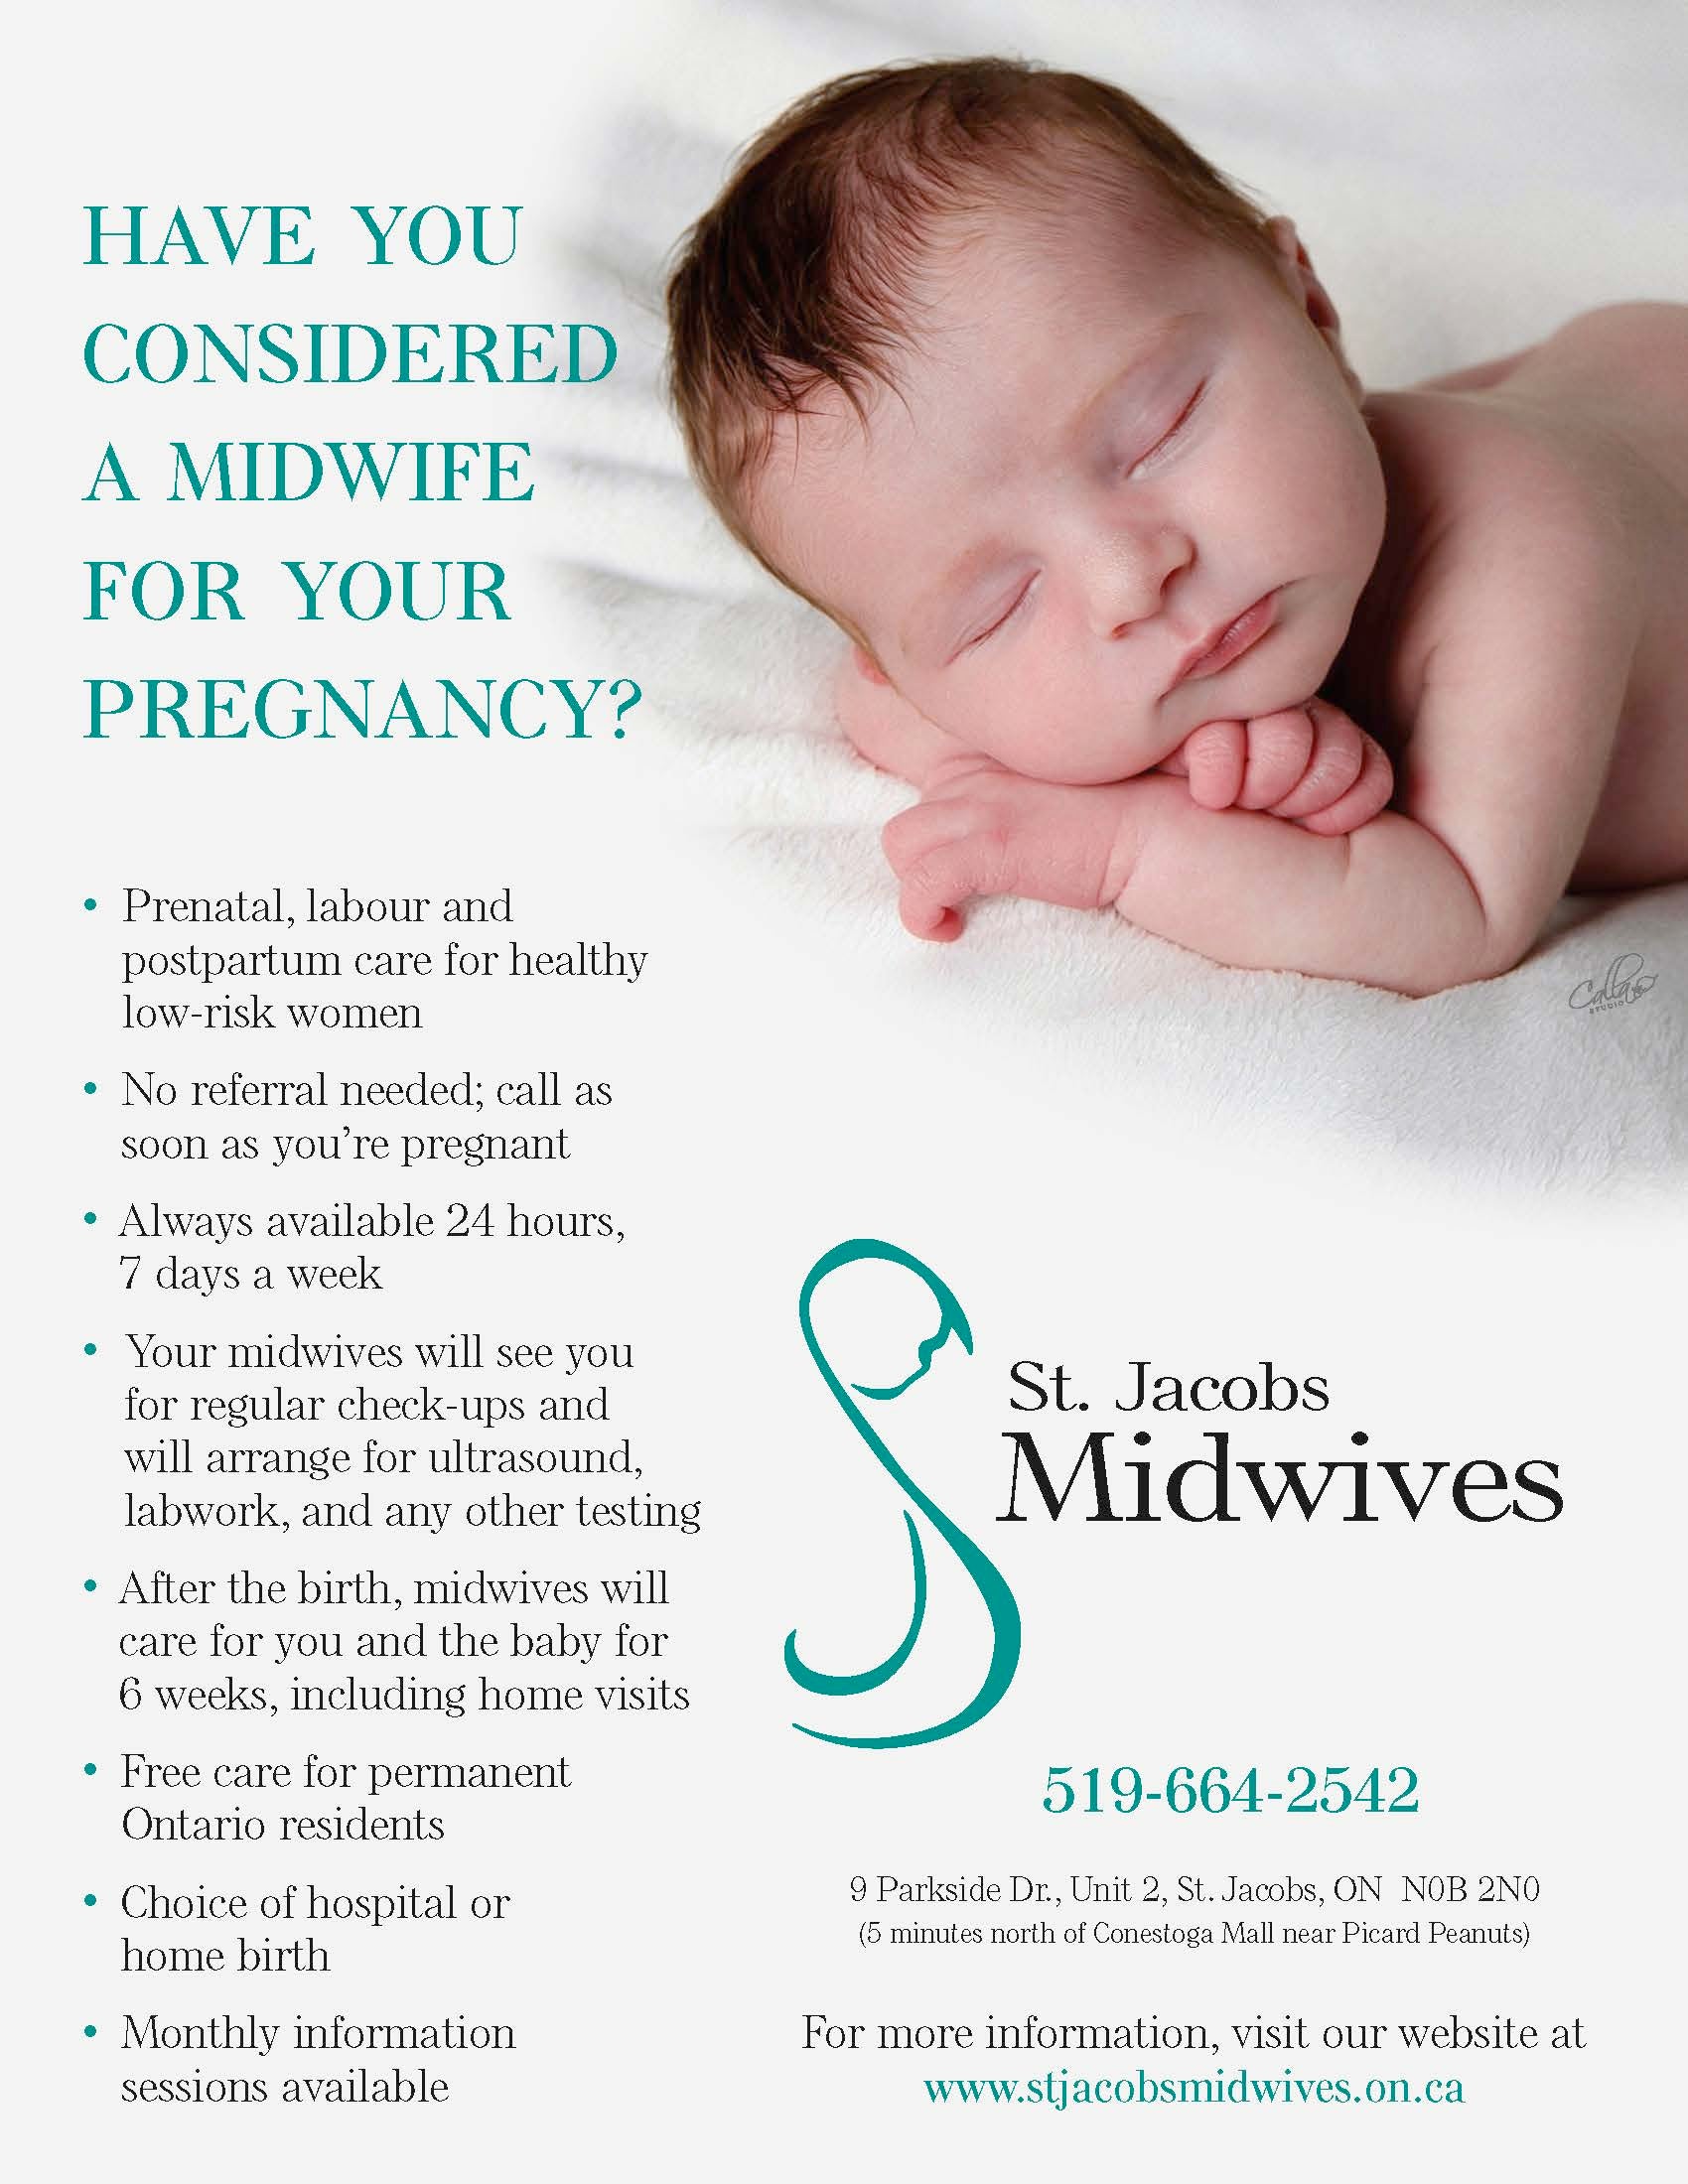 consider a midwive flyer for St. Jacobs Midwives